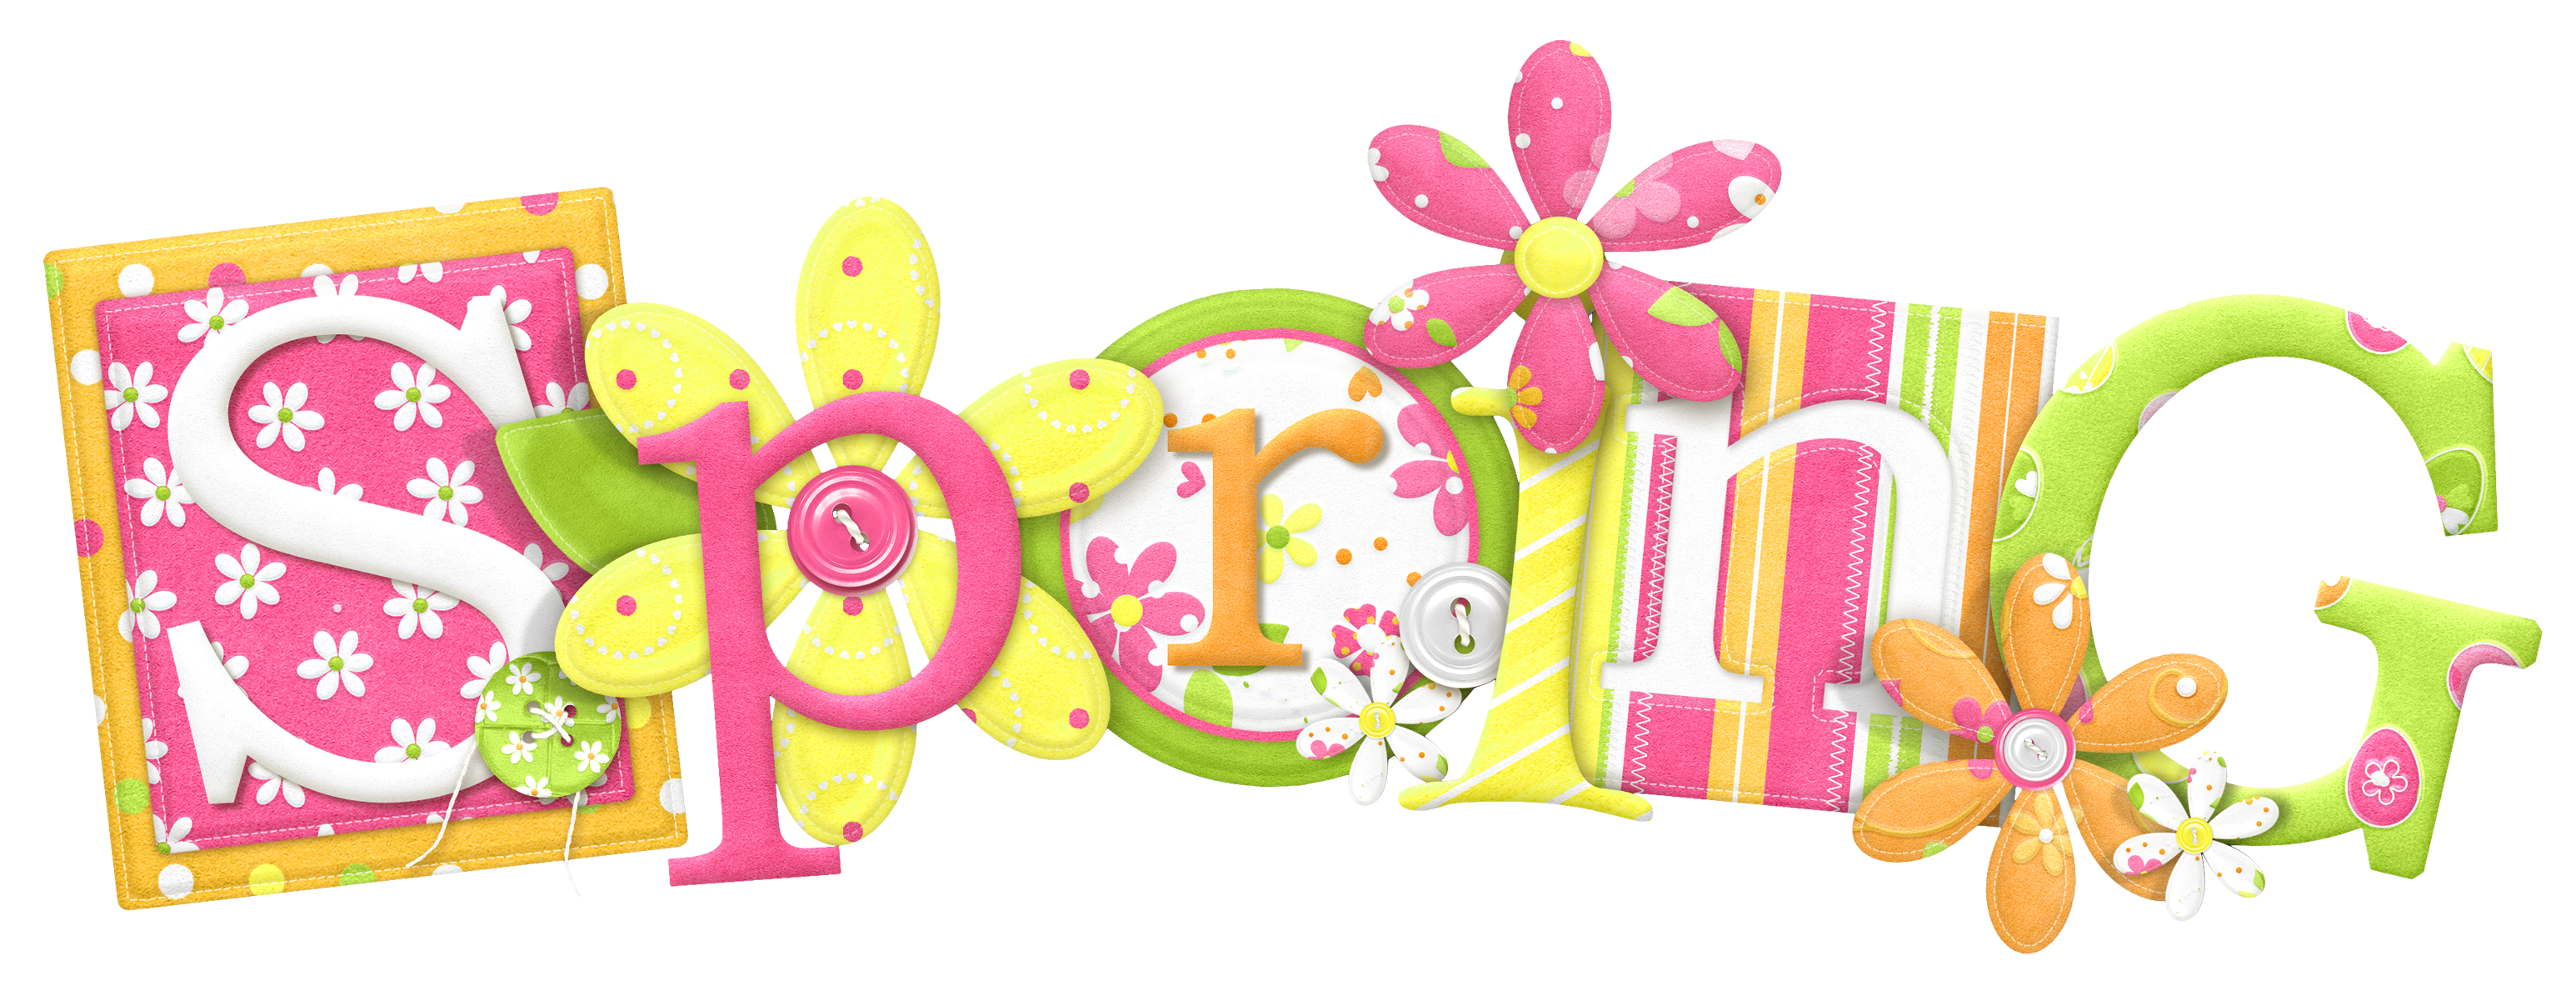 clipart spring images - photo #37